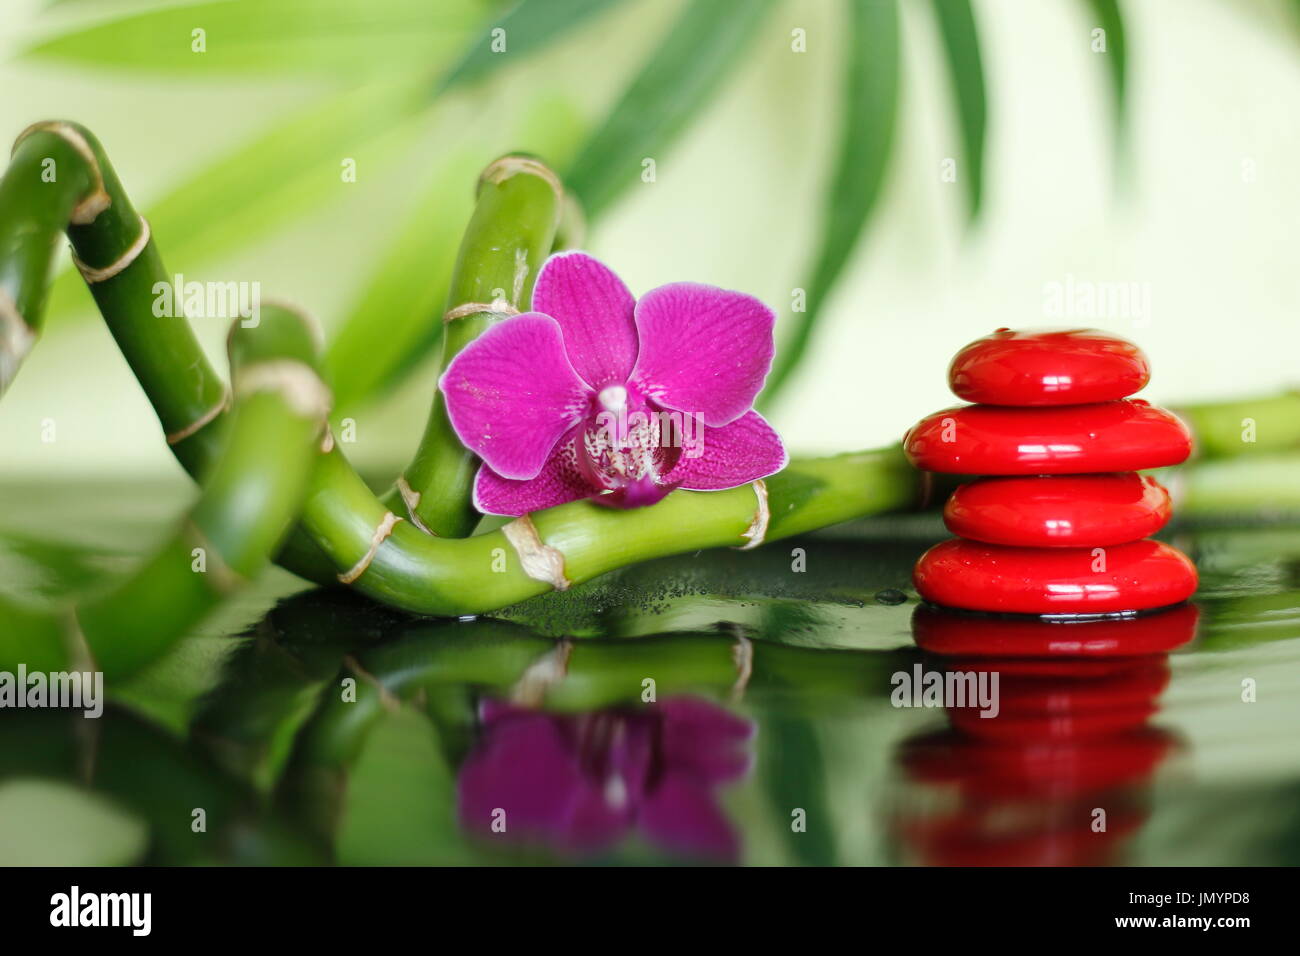 Red pebbles arranged in Zen lifestyle with an orchid and bamboo branch on shiny floor Stock Photo